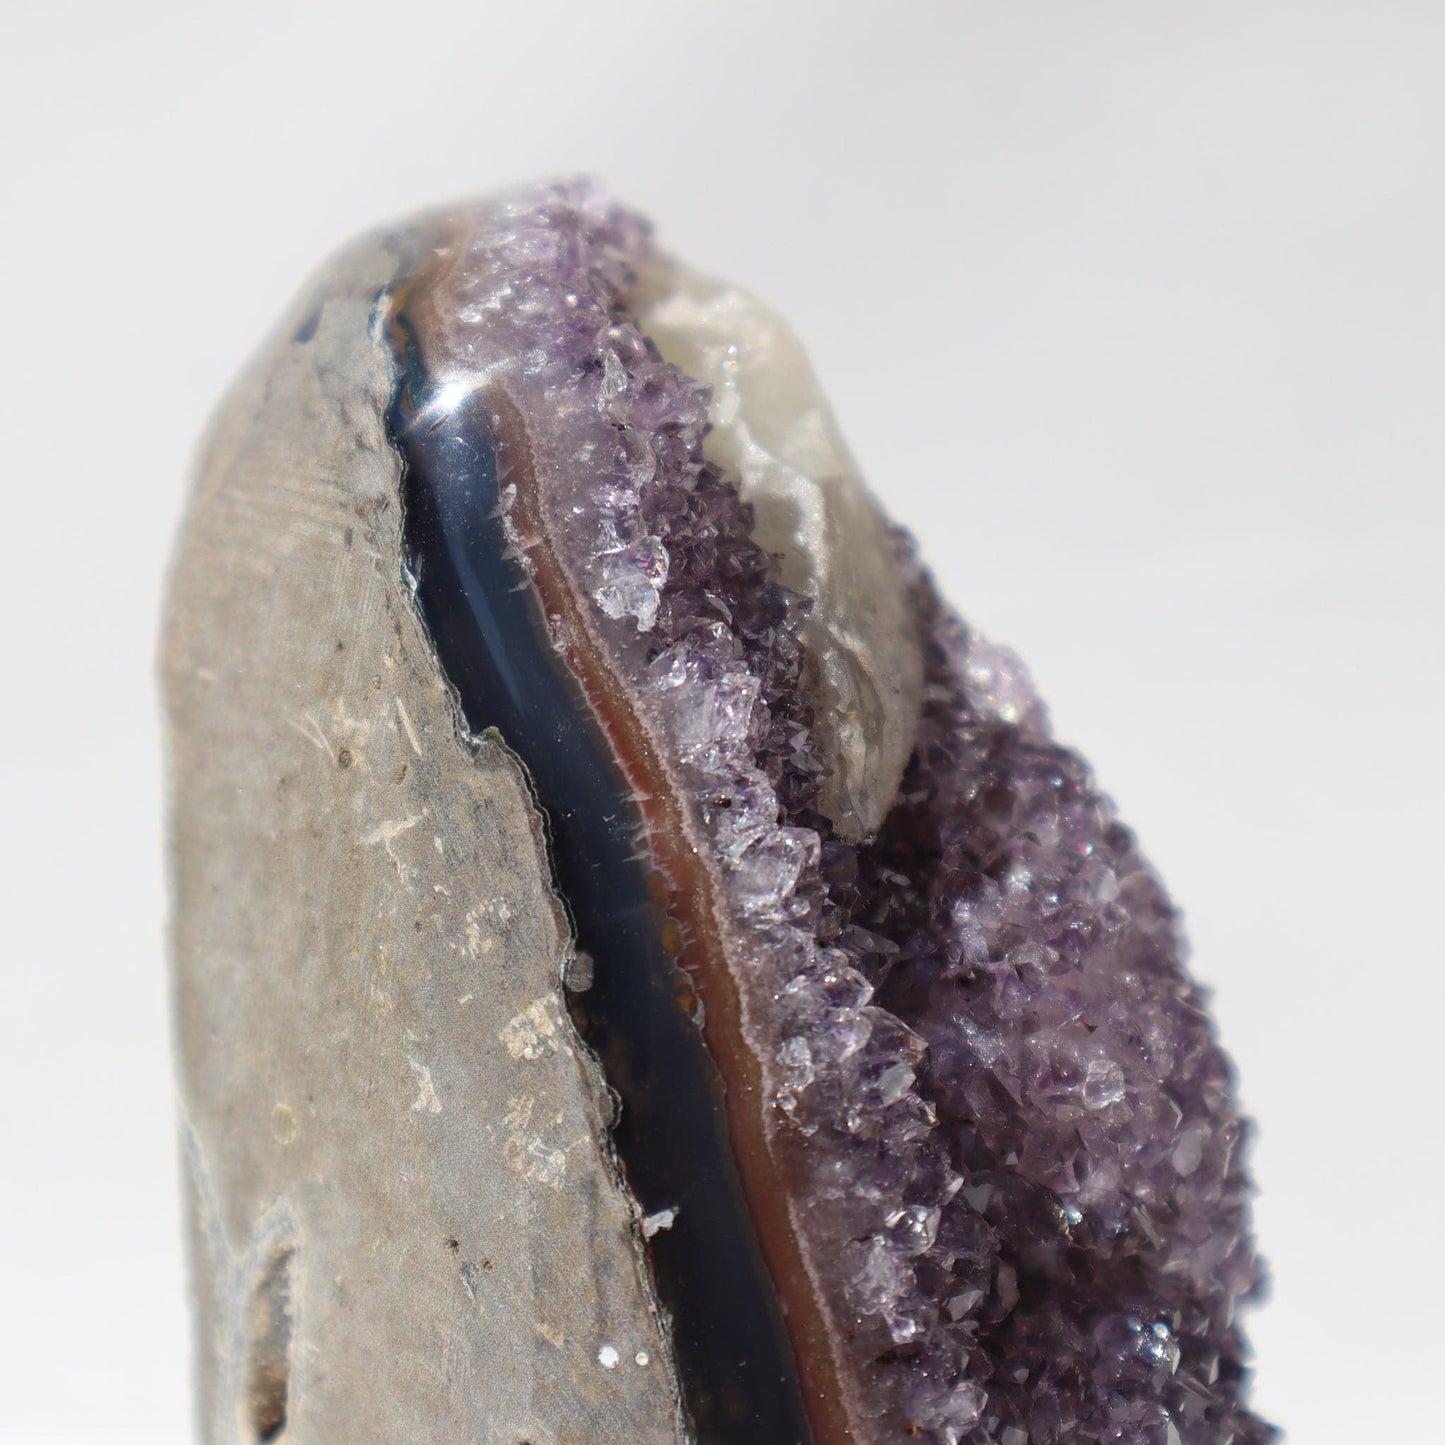 Geode - Jasper and Calcite, rare for sale - Deepest Earth